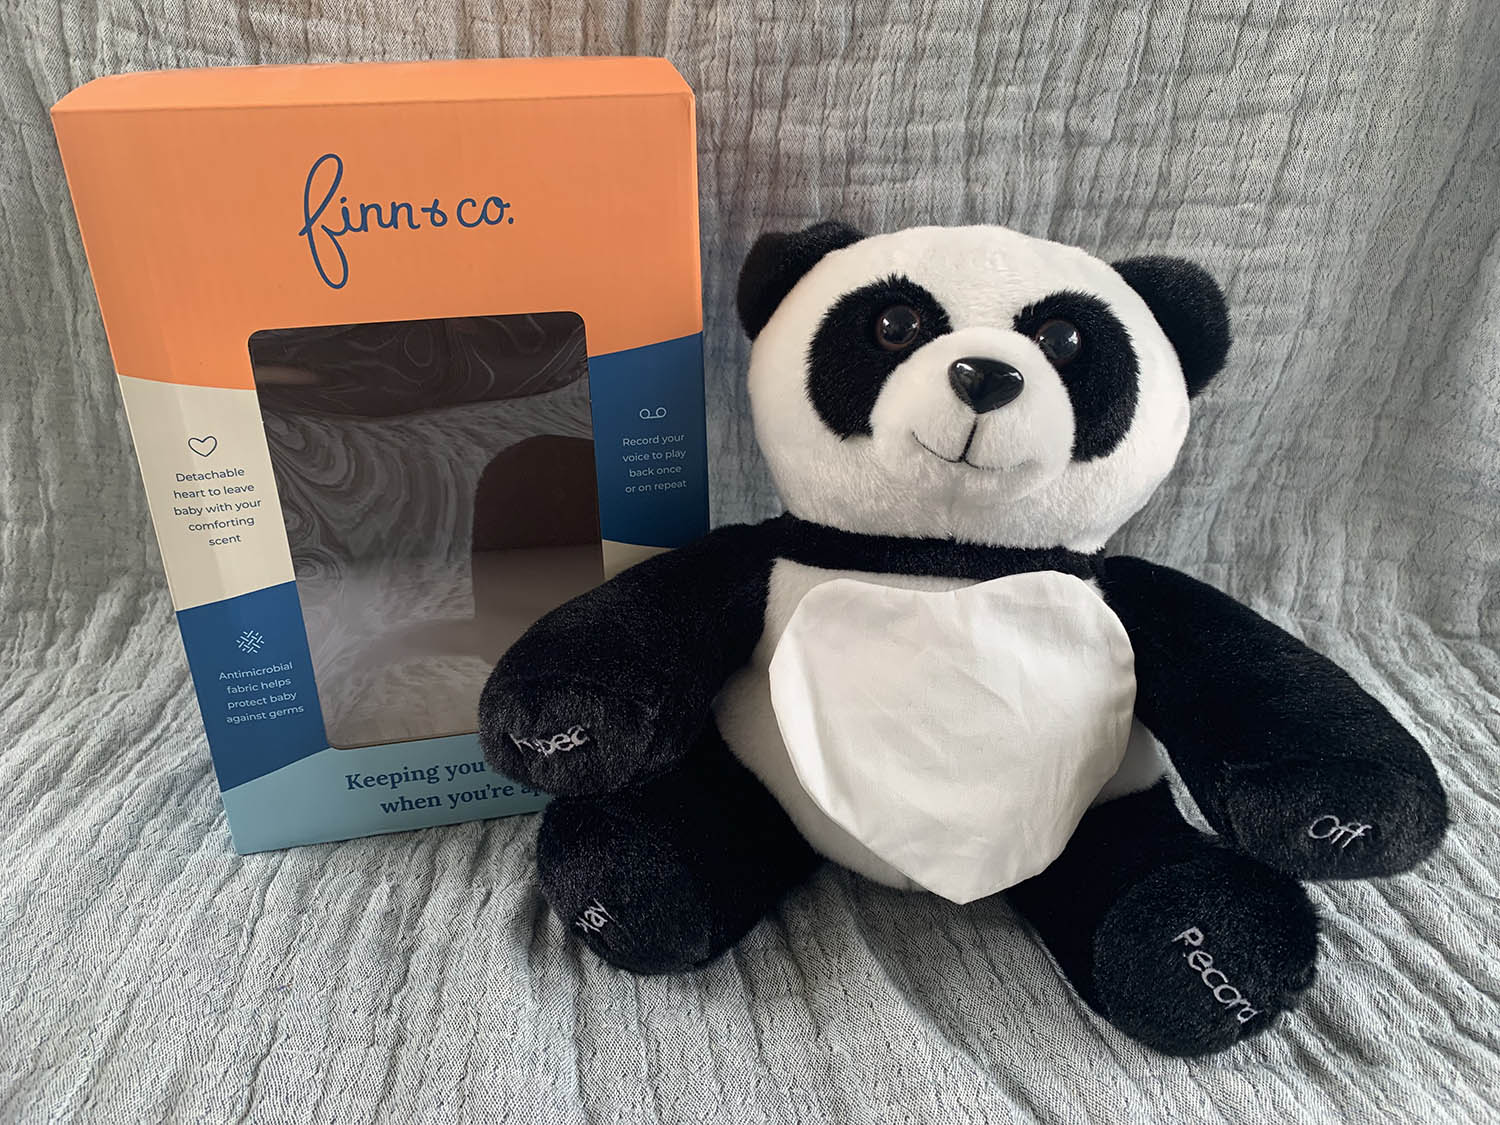 Finn the Panda from Finn and Co Gifts designed for babies in the NICU